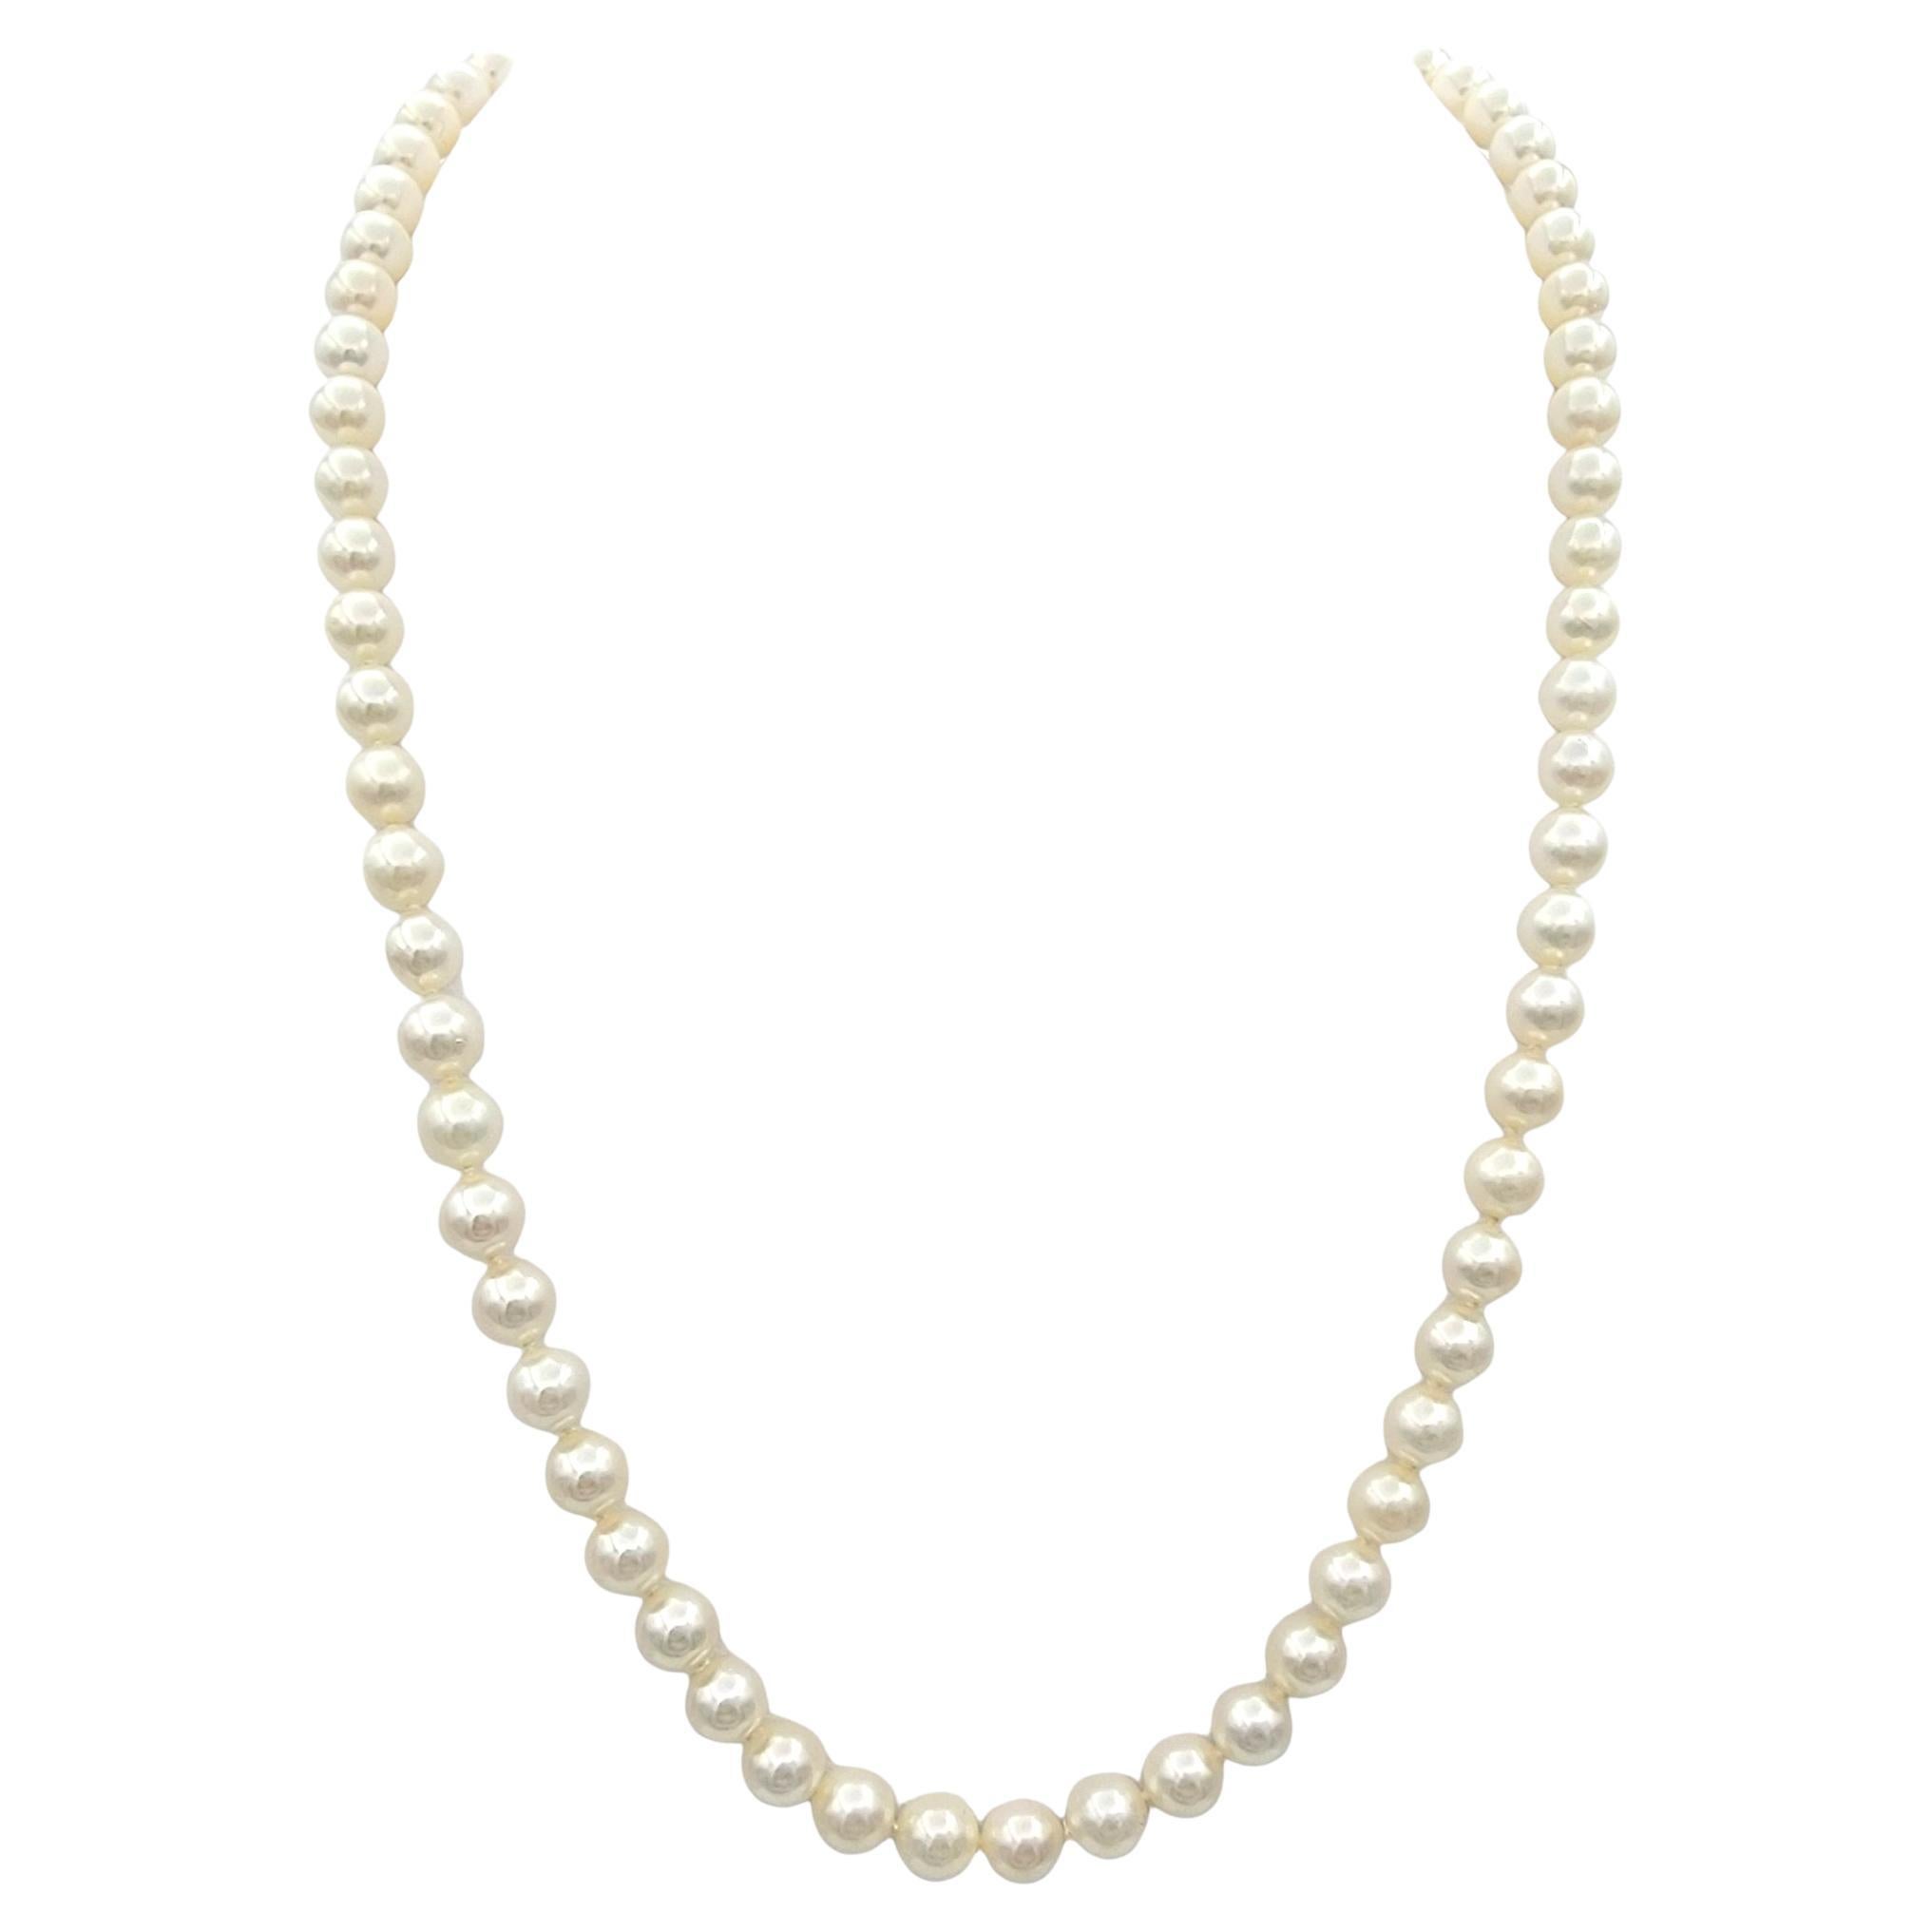 Mikimoto Cultured Akoya Pearl 20" Strand Necklace with 18 Karat Gold Clasp For Sale